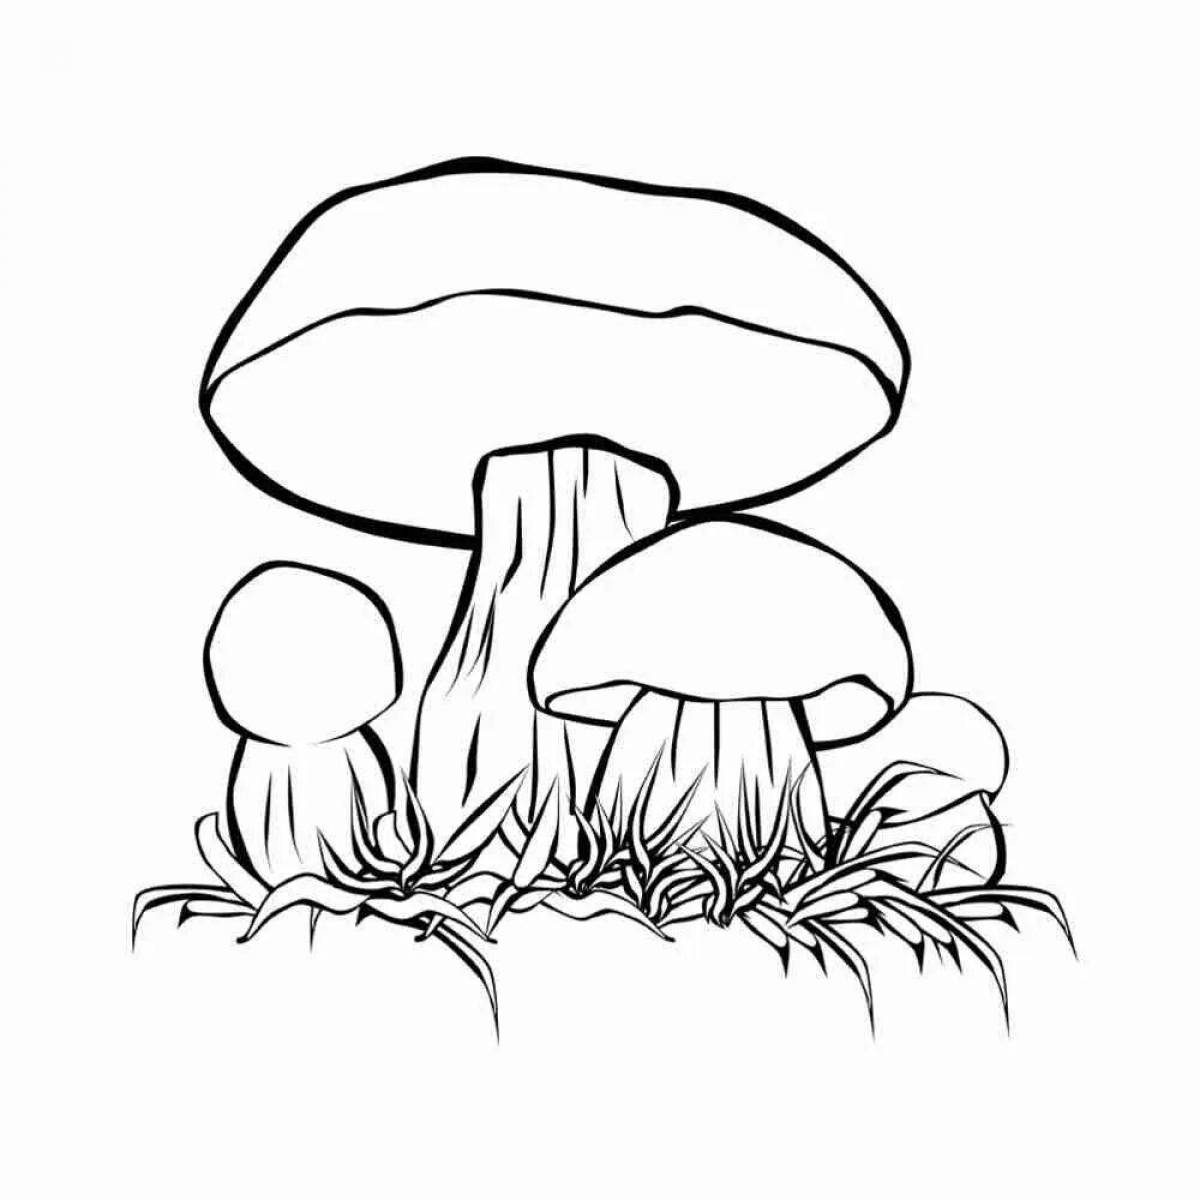 Exciting coloring of mushrooms